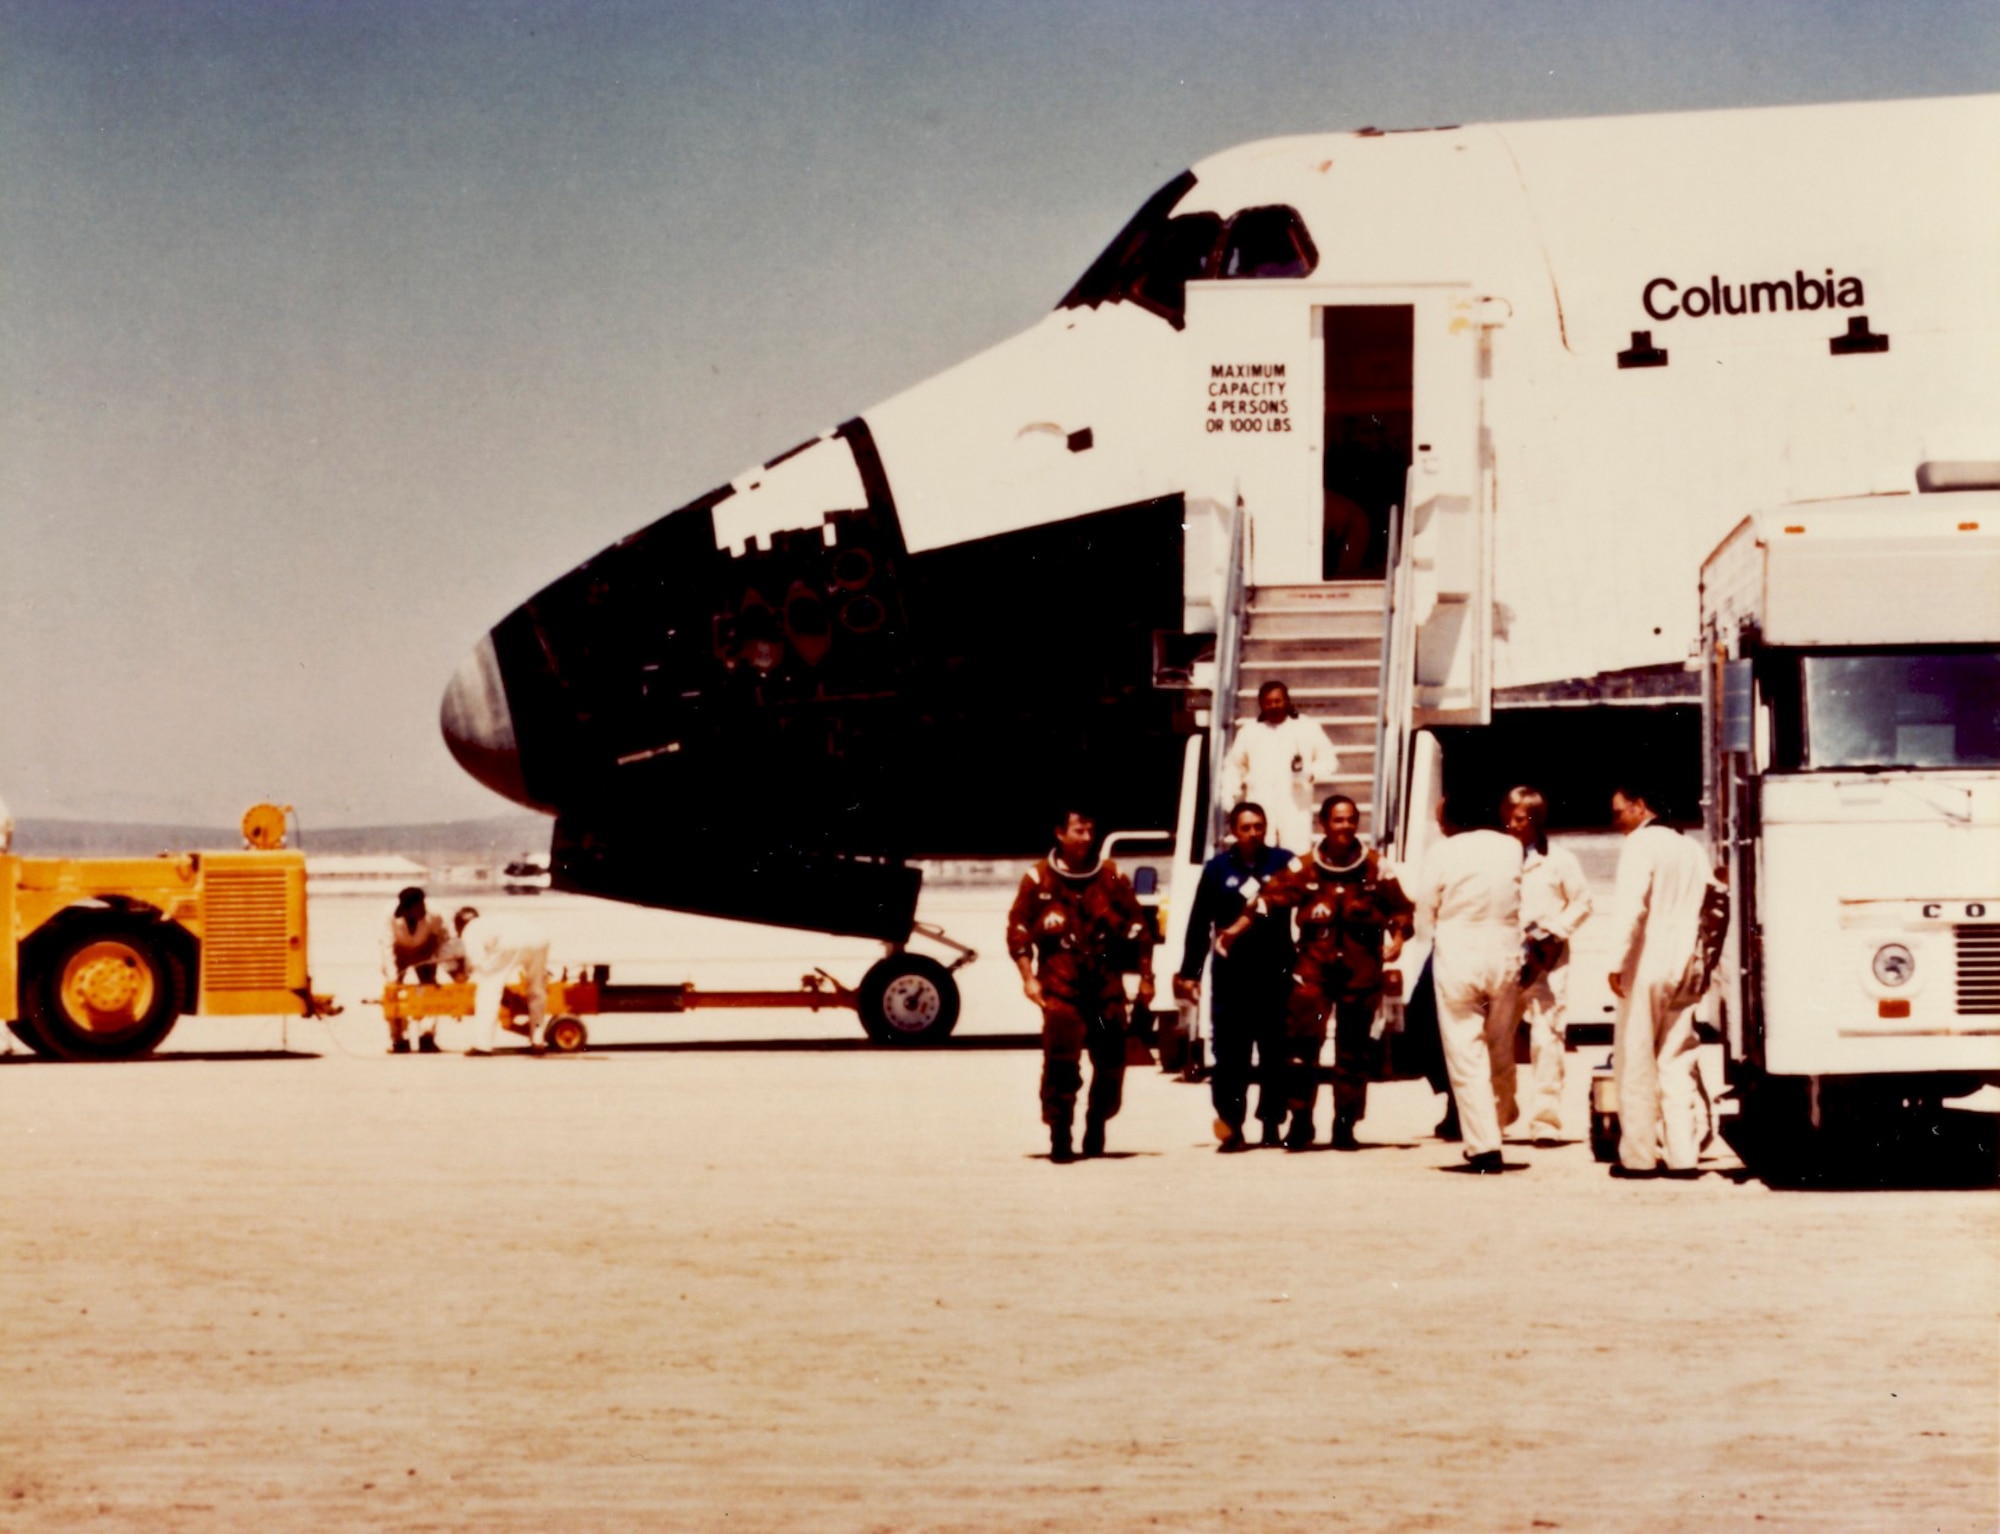 Astronauts John Young and Robert Crippen exit Columbia after landing on Rogers Dry Lake Bed April 14, 1981. (U.S. Air Force photo provided by the Air Force Test Center History Office)